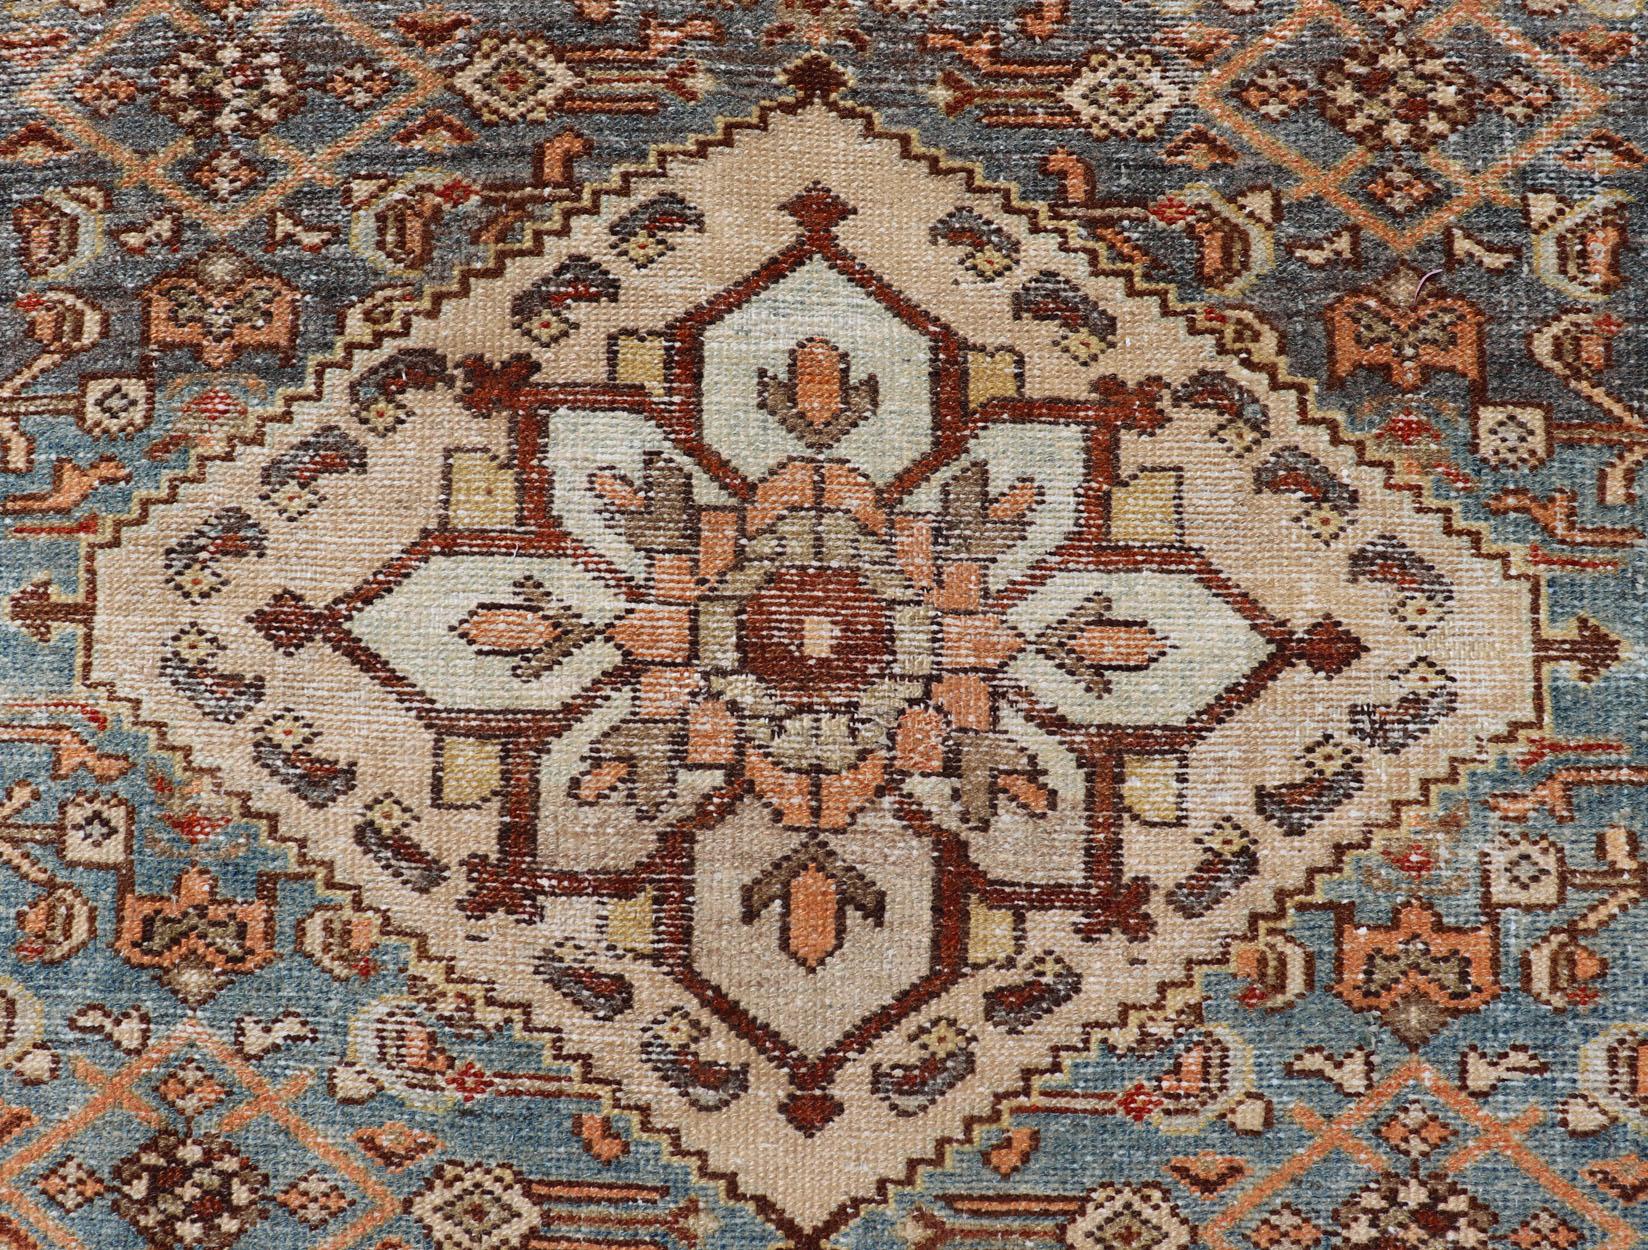 Antique Persian Hamadan Rug with Central Medallion & Sub-Geometric Floral Design In Good Condition For Sale In Atlanta, GA